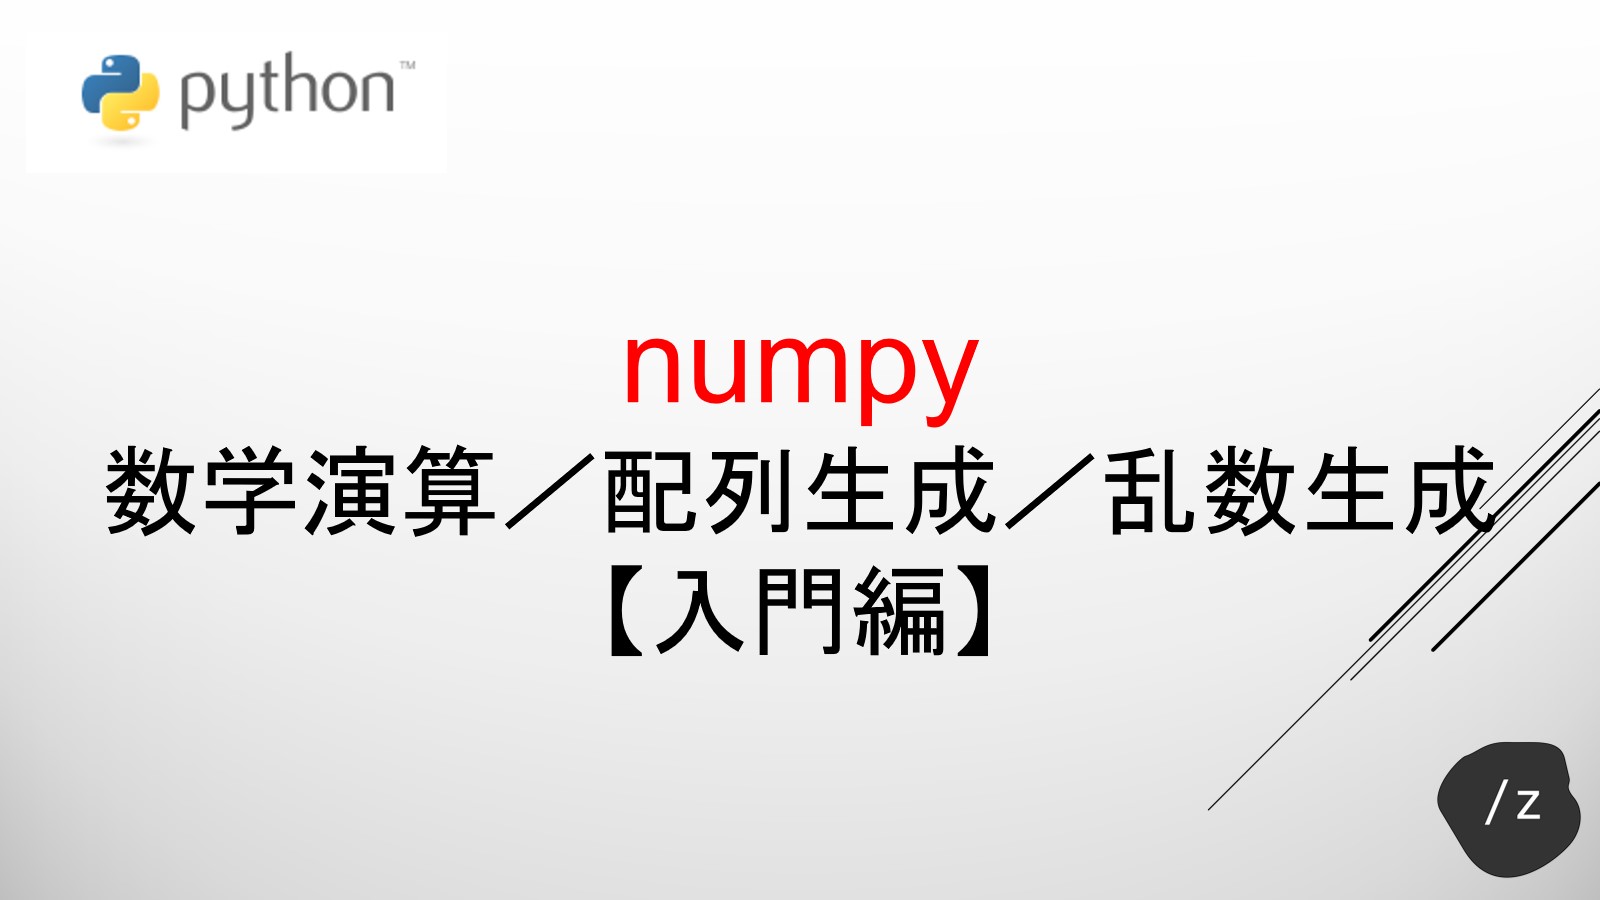 numpy-firststep